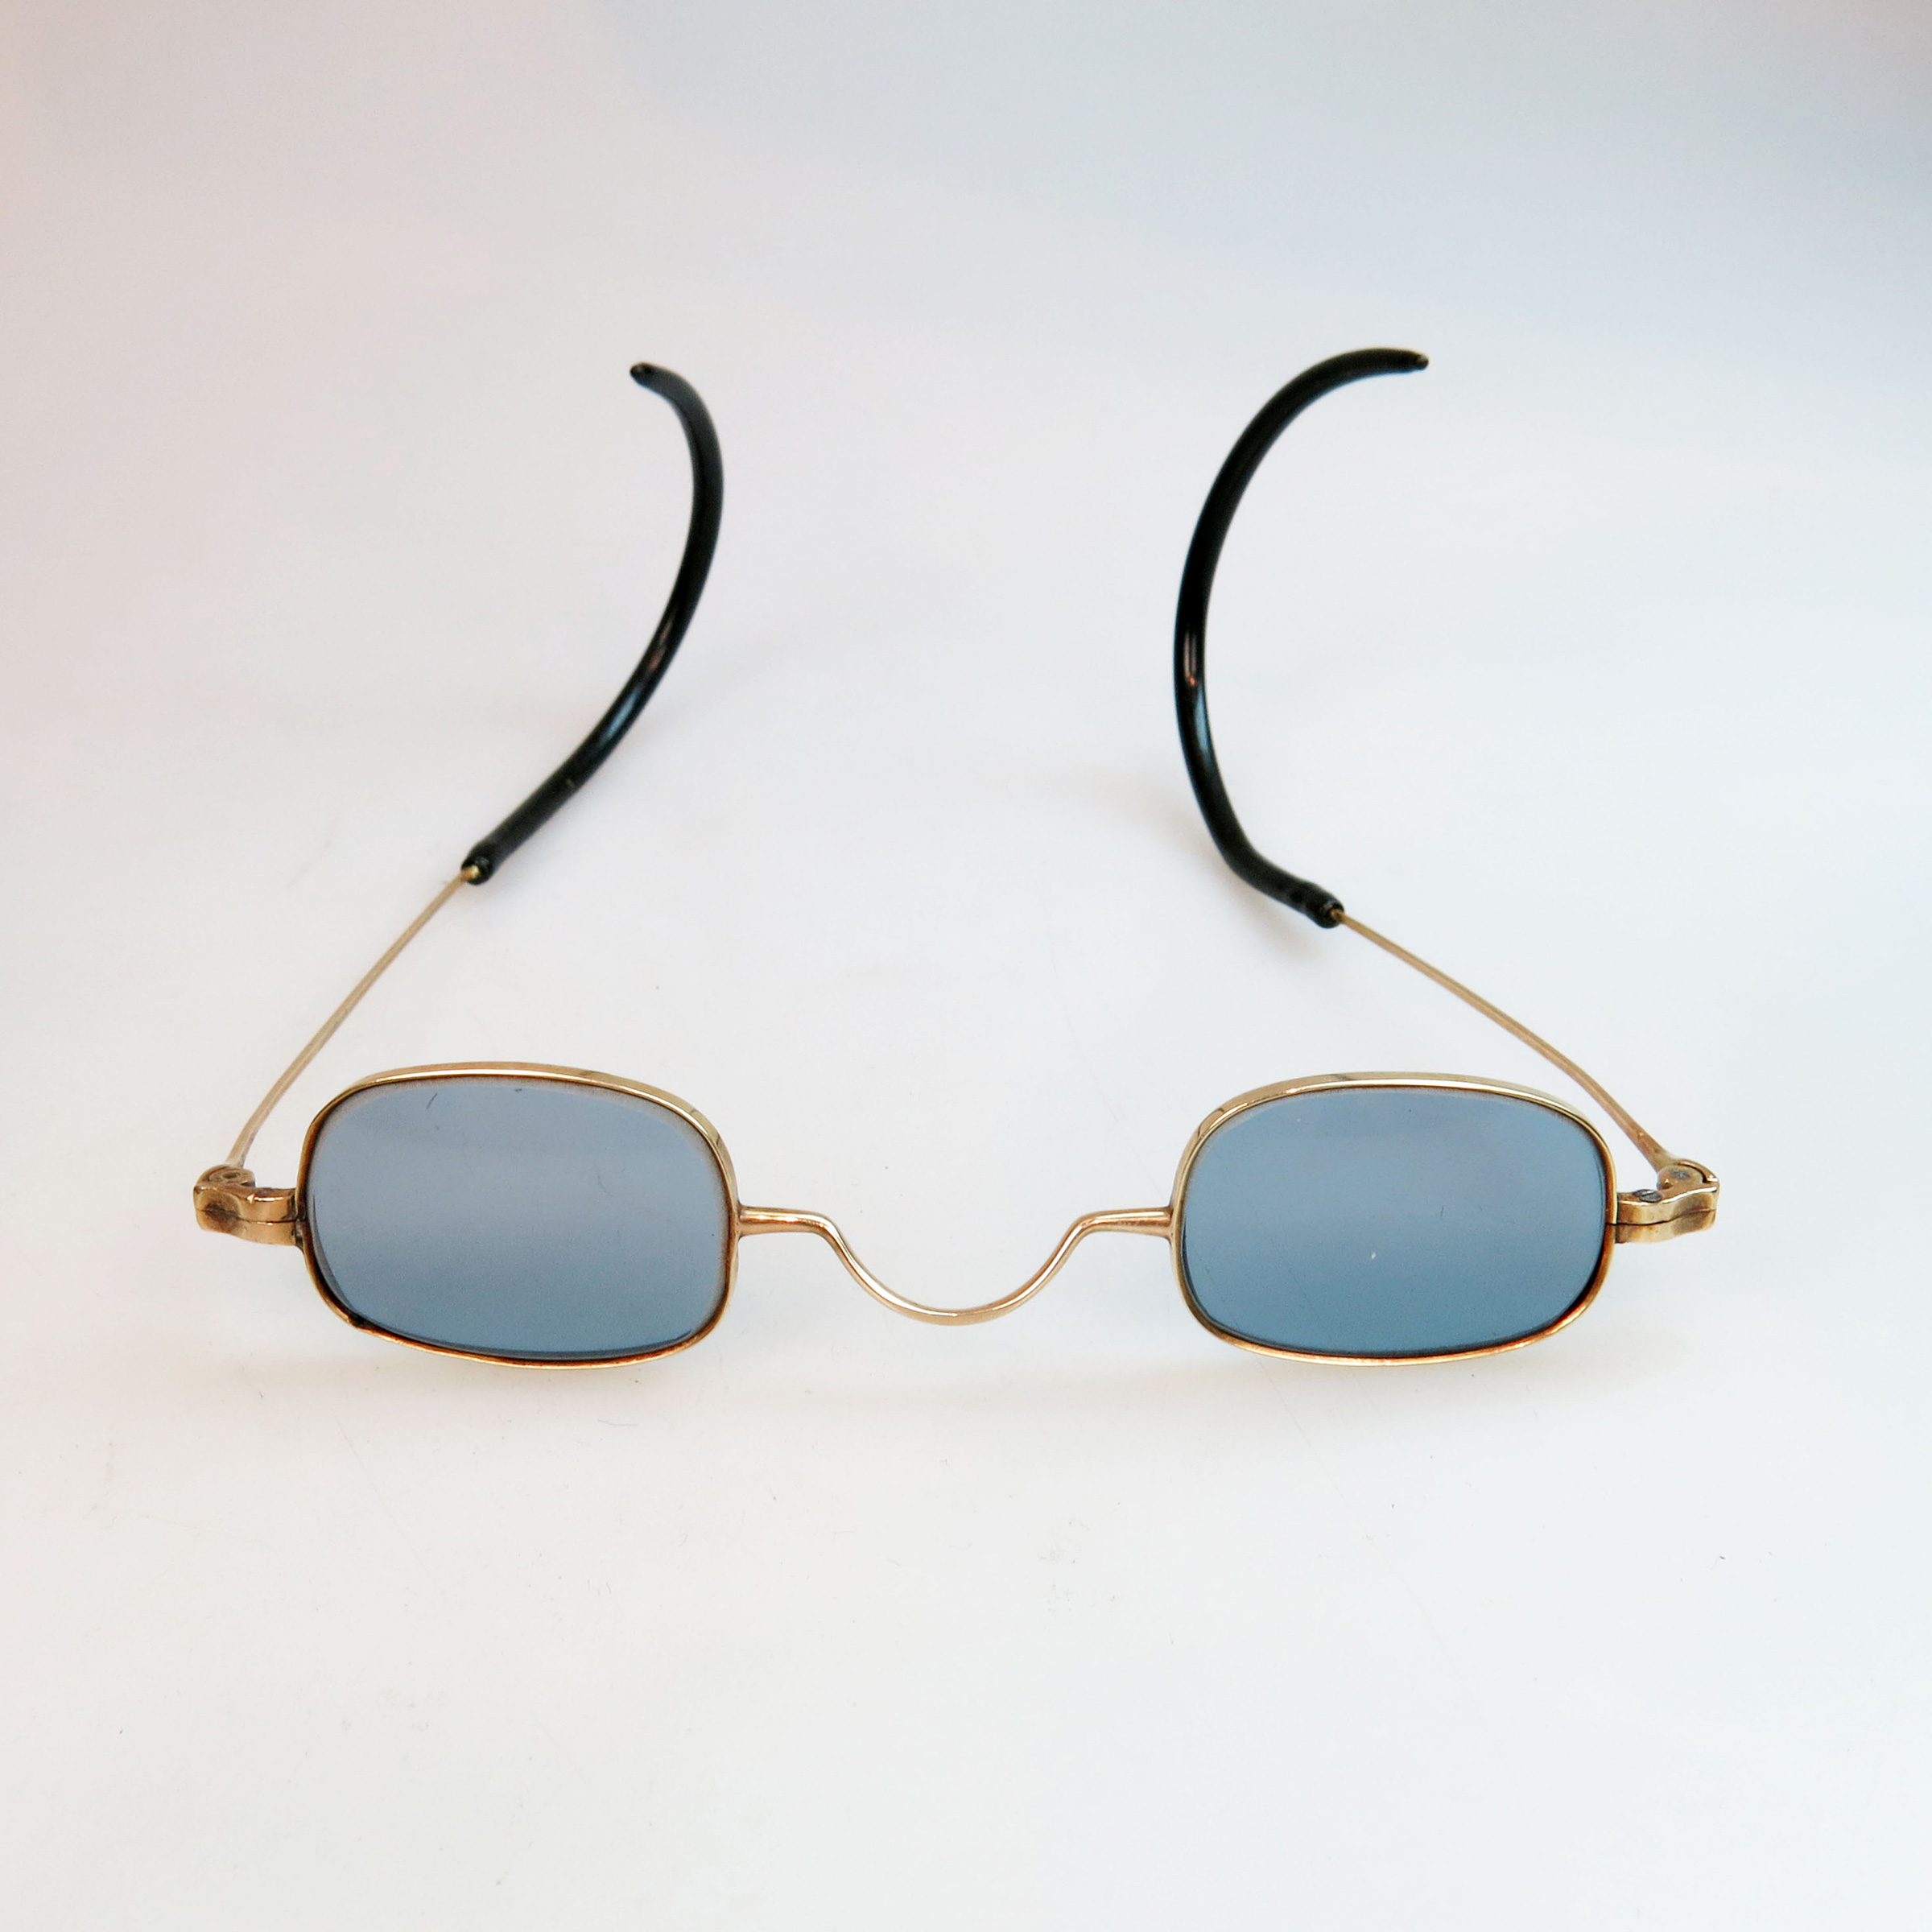 Pair Of 19th Century 14k Gold Framed Spectacles